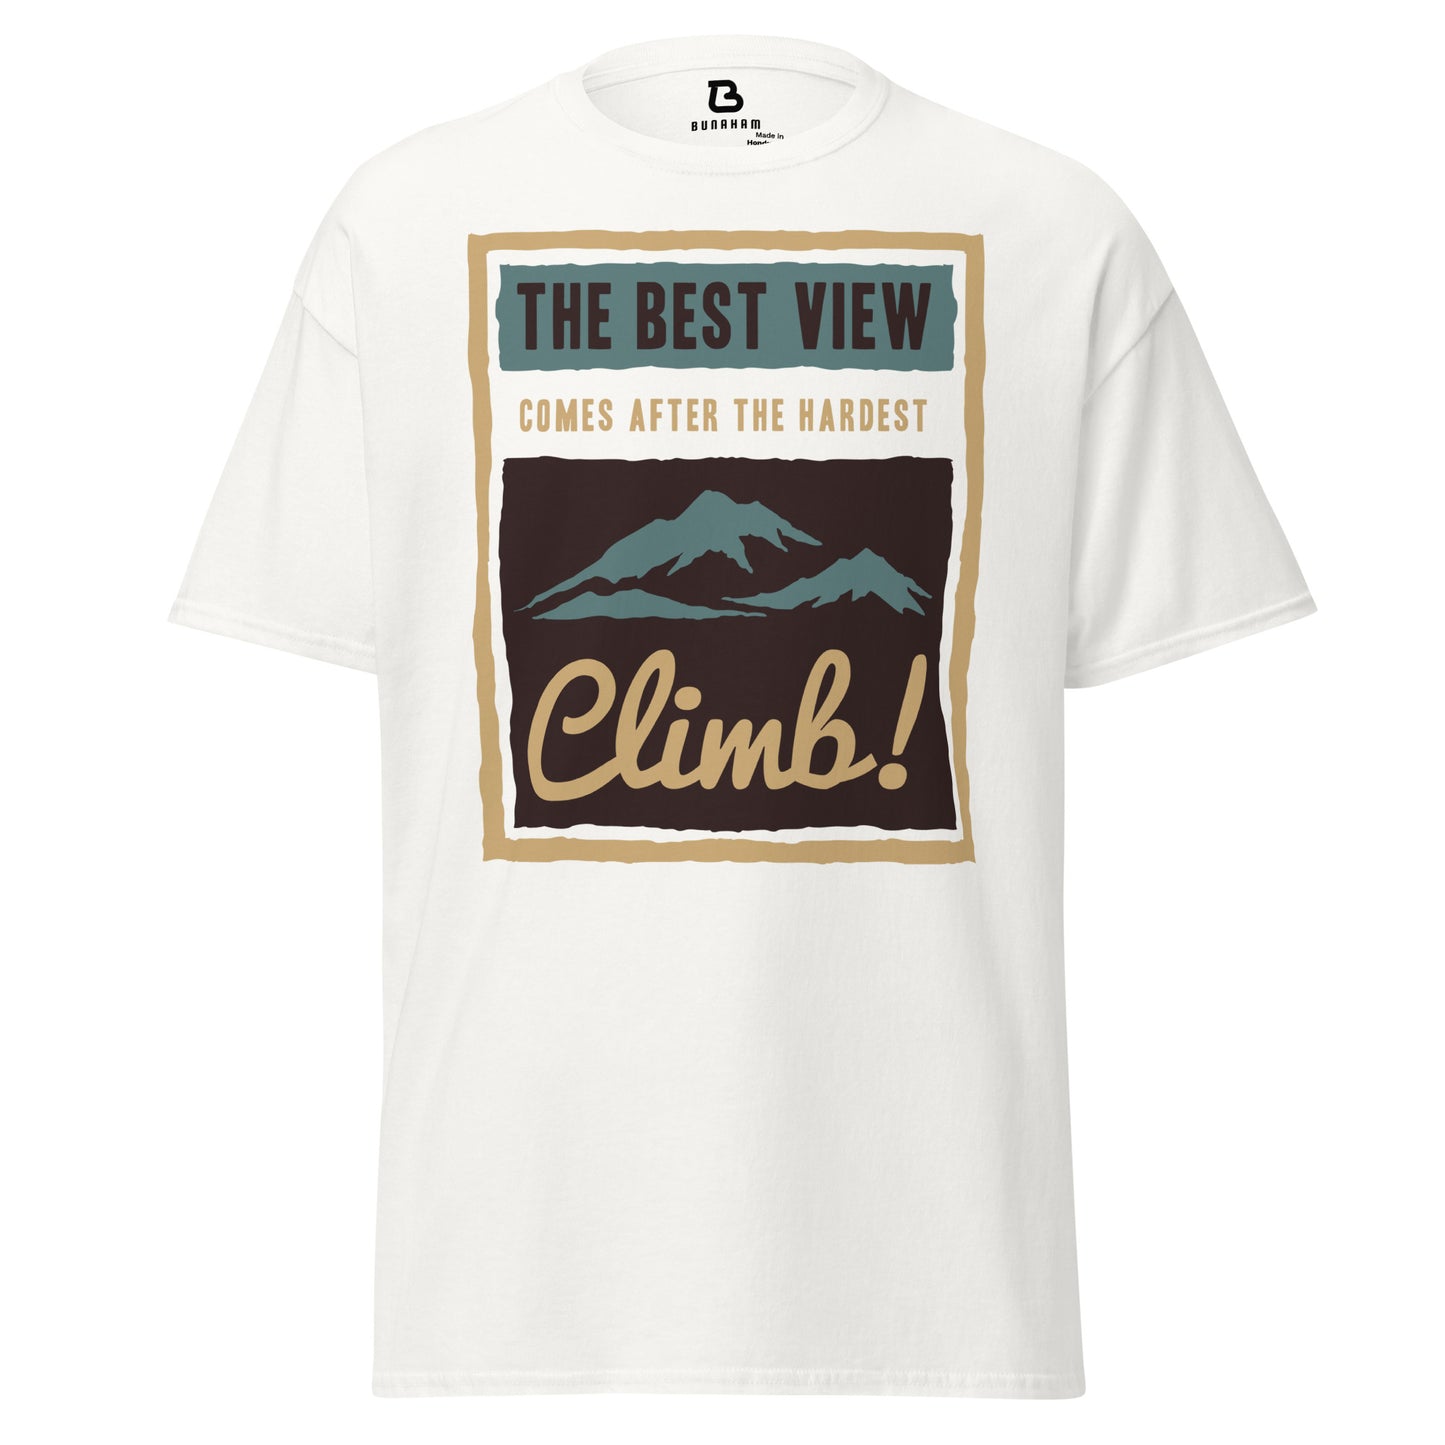 Men's Classic Tee - The Best View Comes From The Hardest